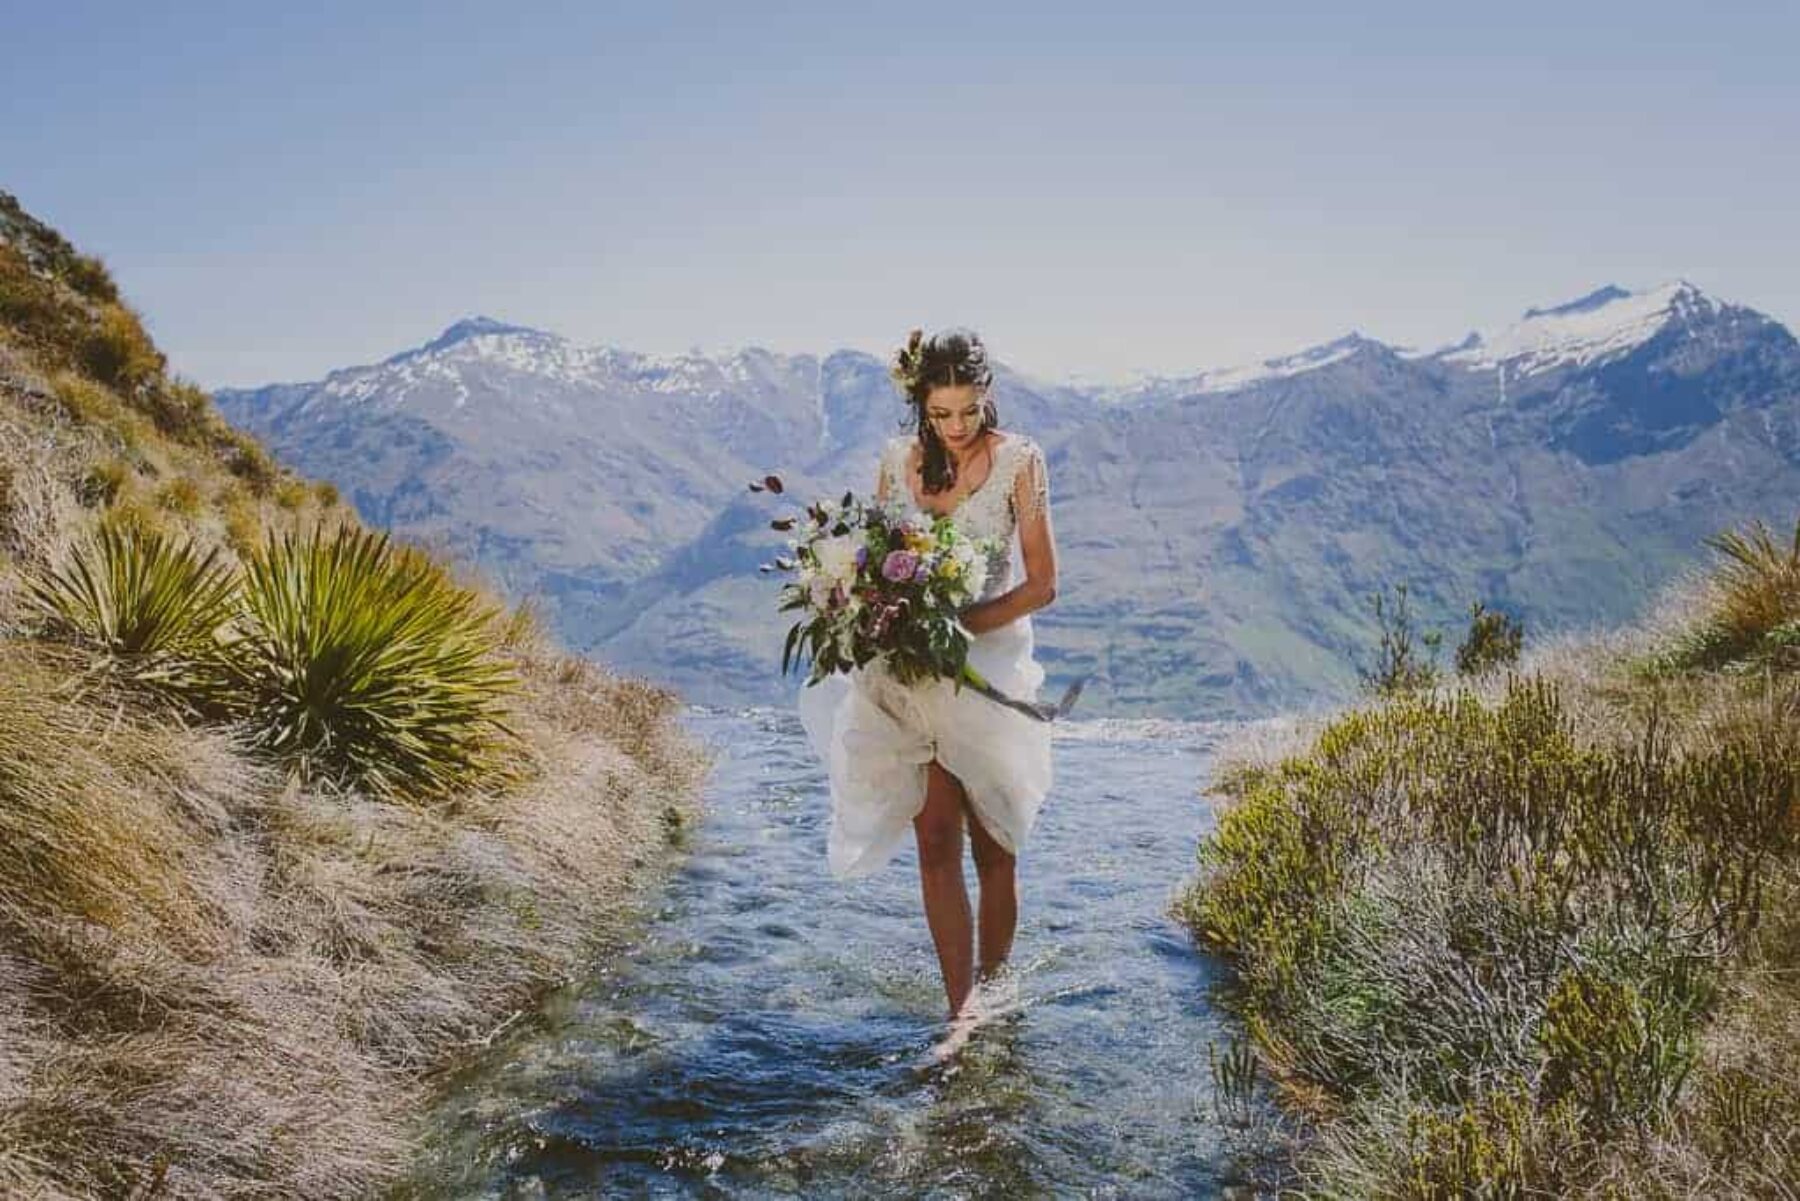 Win a Wanaka New Zealand helicopter wedding valued at over $24,000!